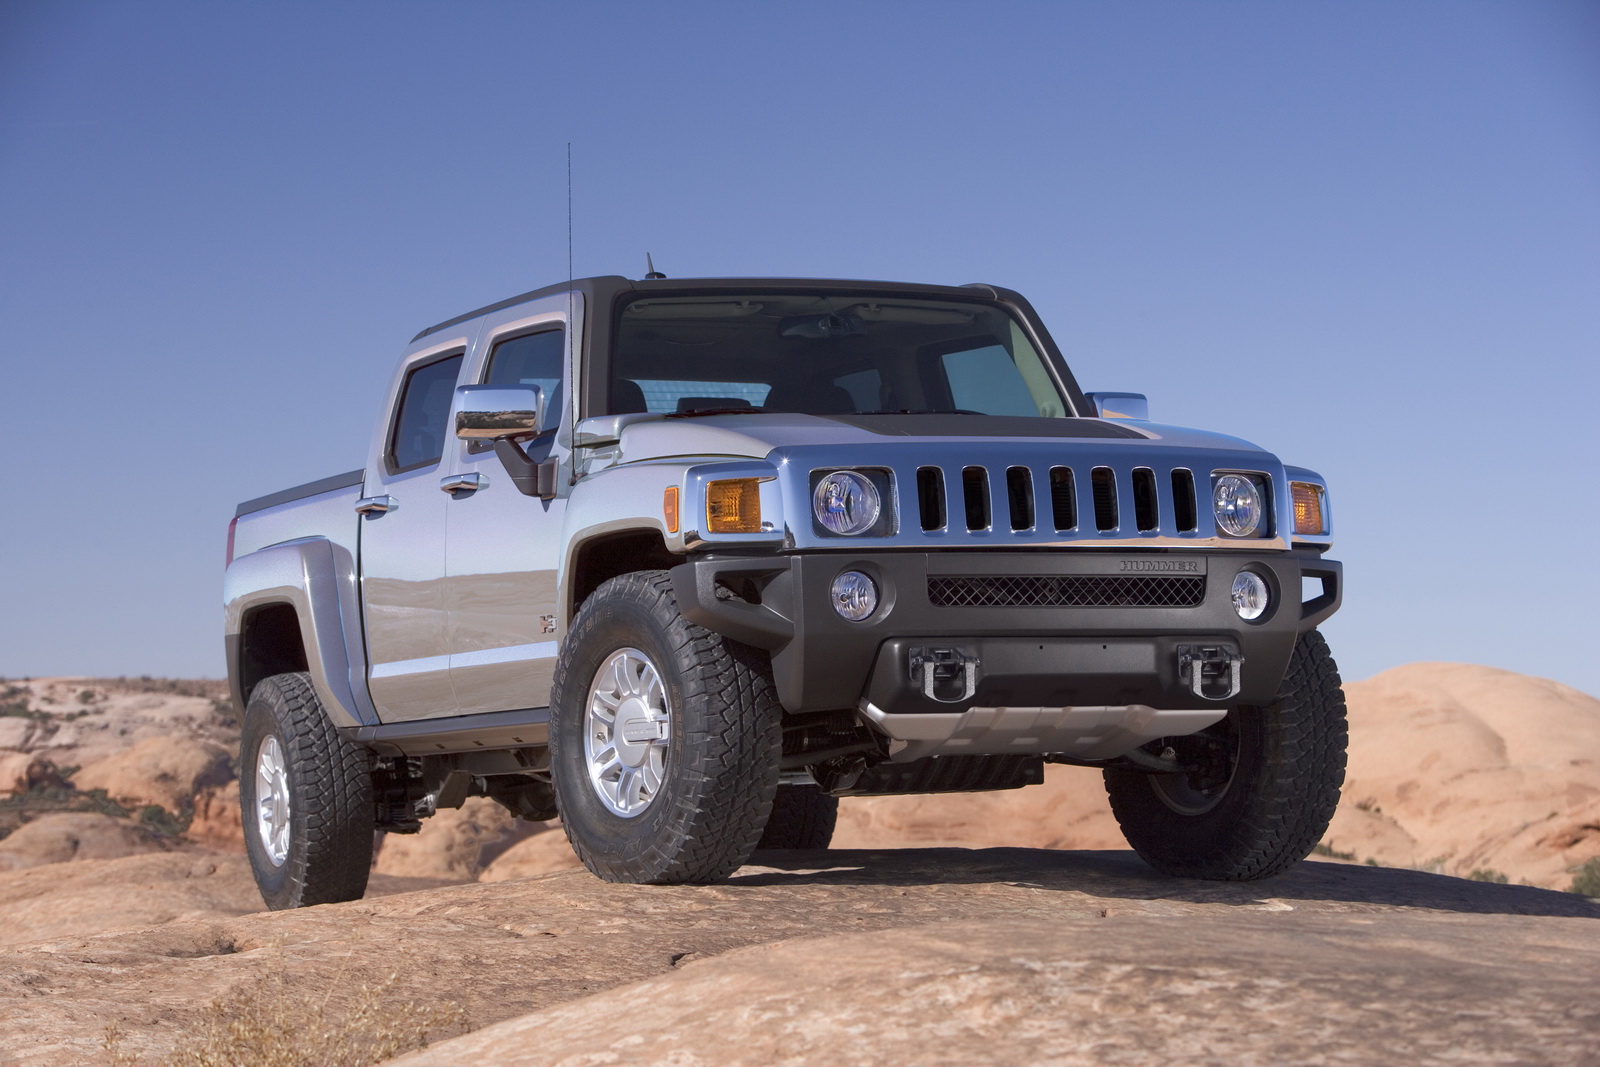 Hummer Is Returning As An Electric Pickup By GMC, Could Be Announced At ...